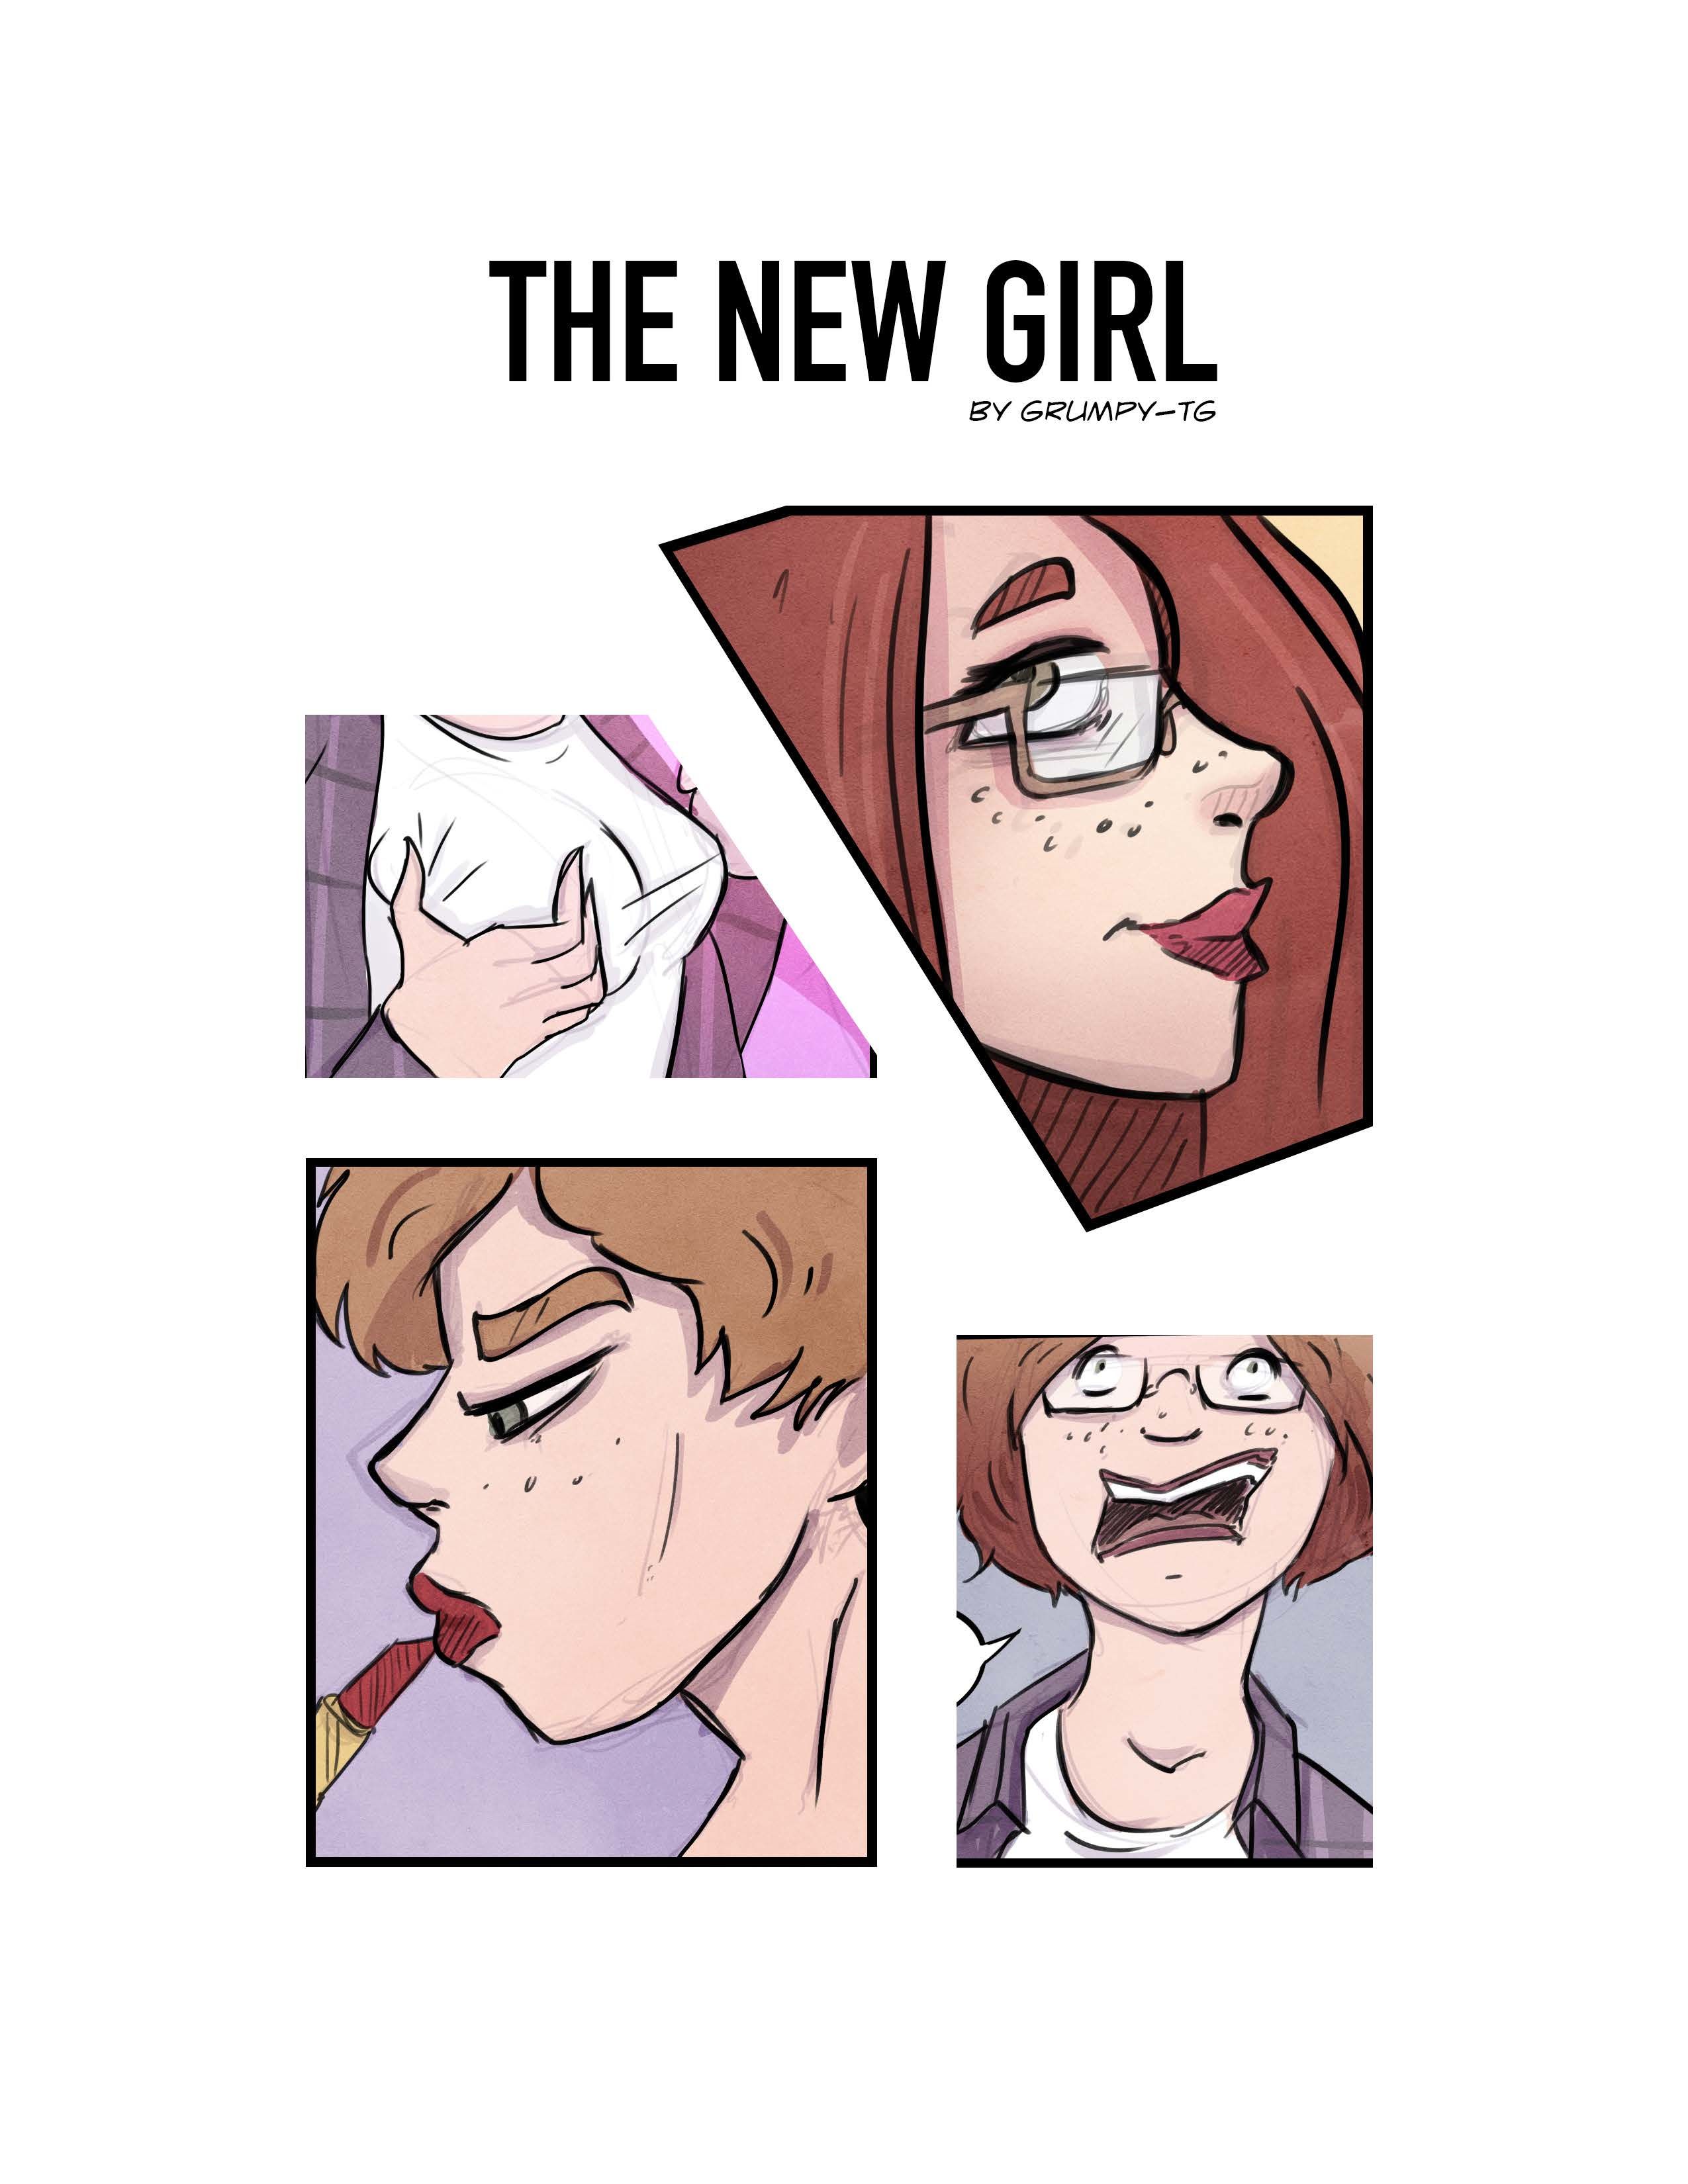 The New Girl Issue 1-5 by Grumpy TG page 1